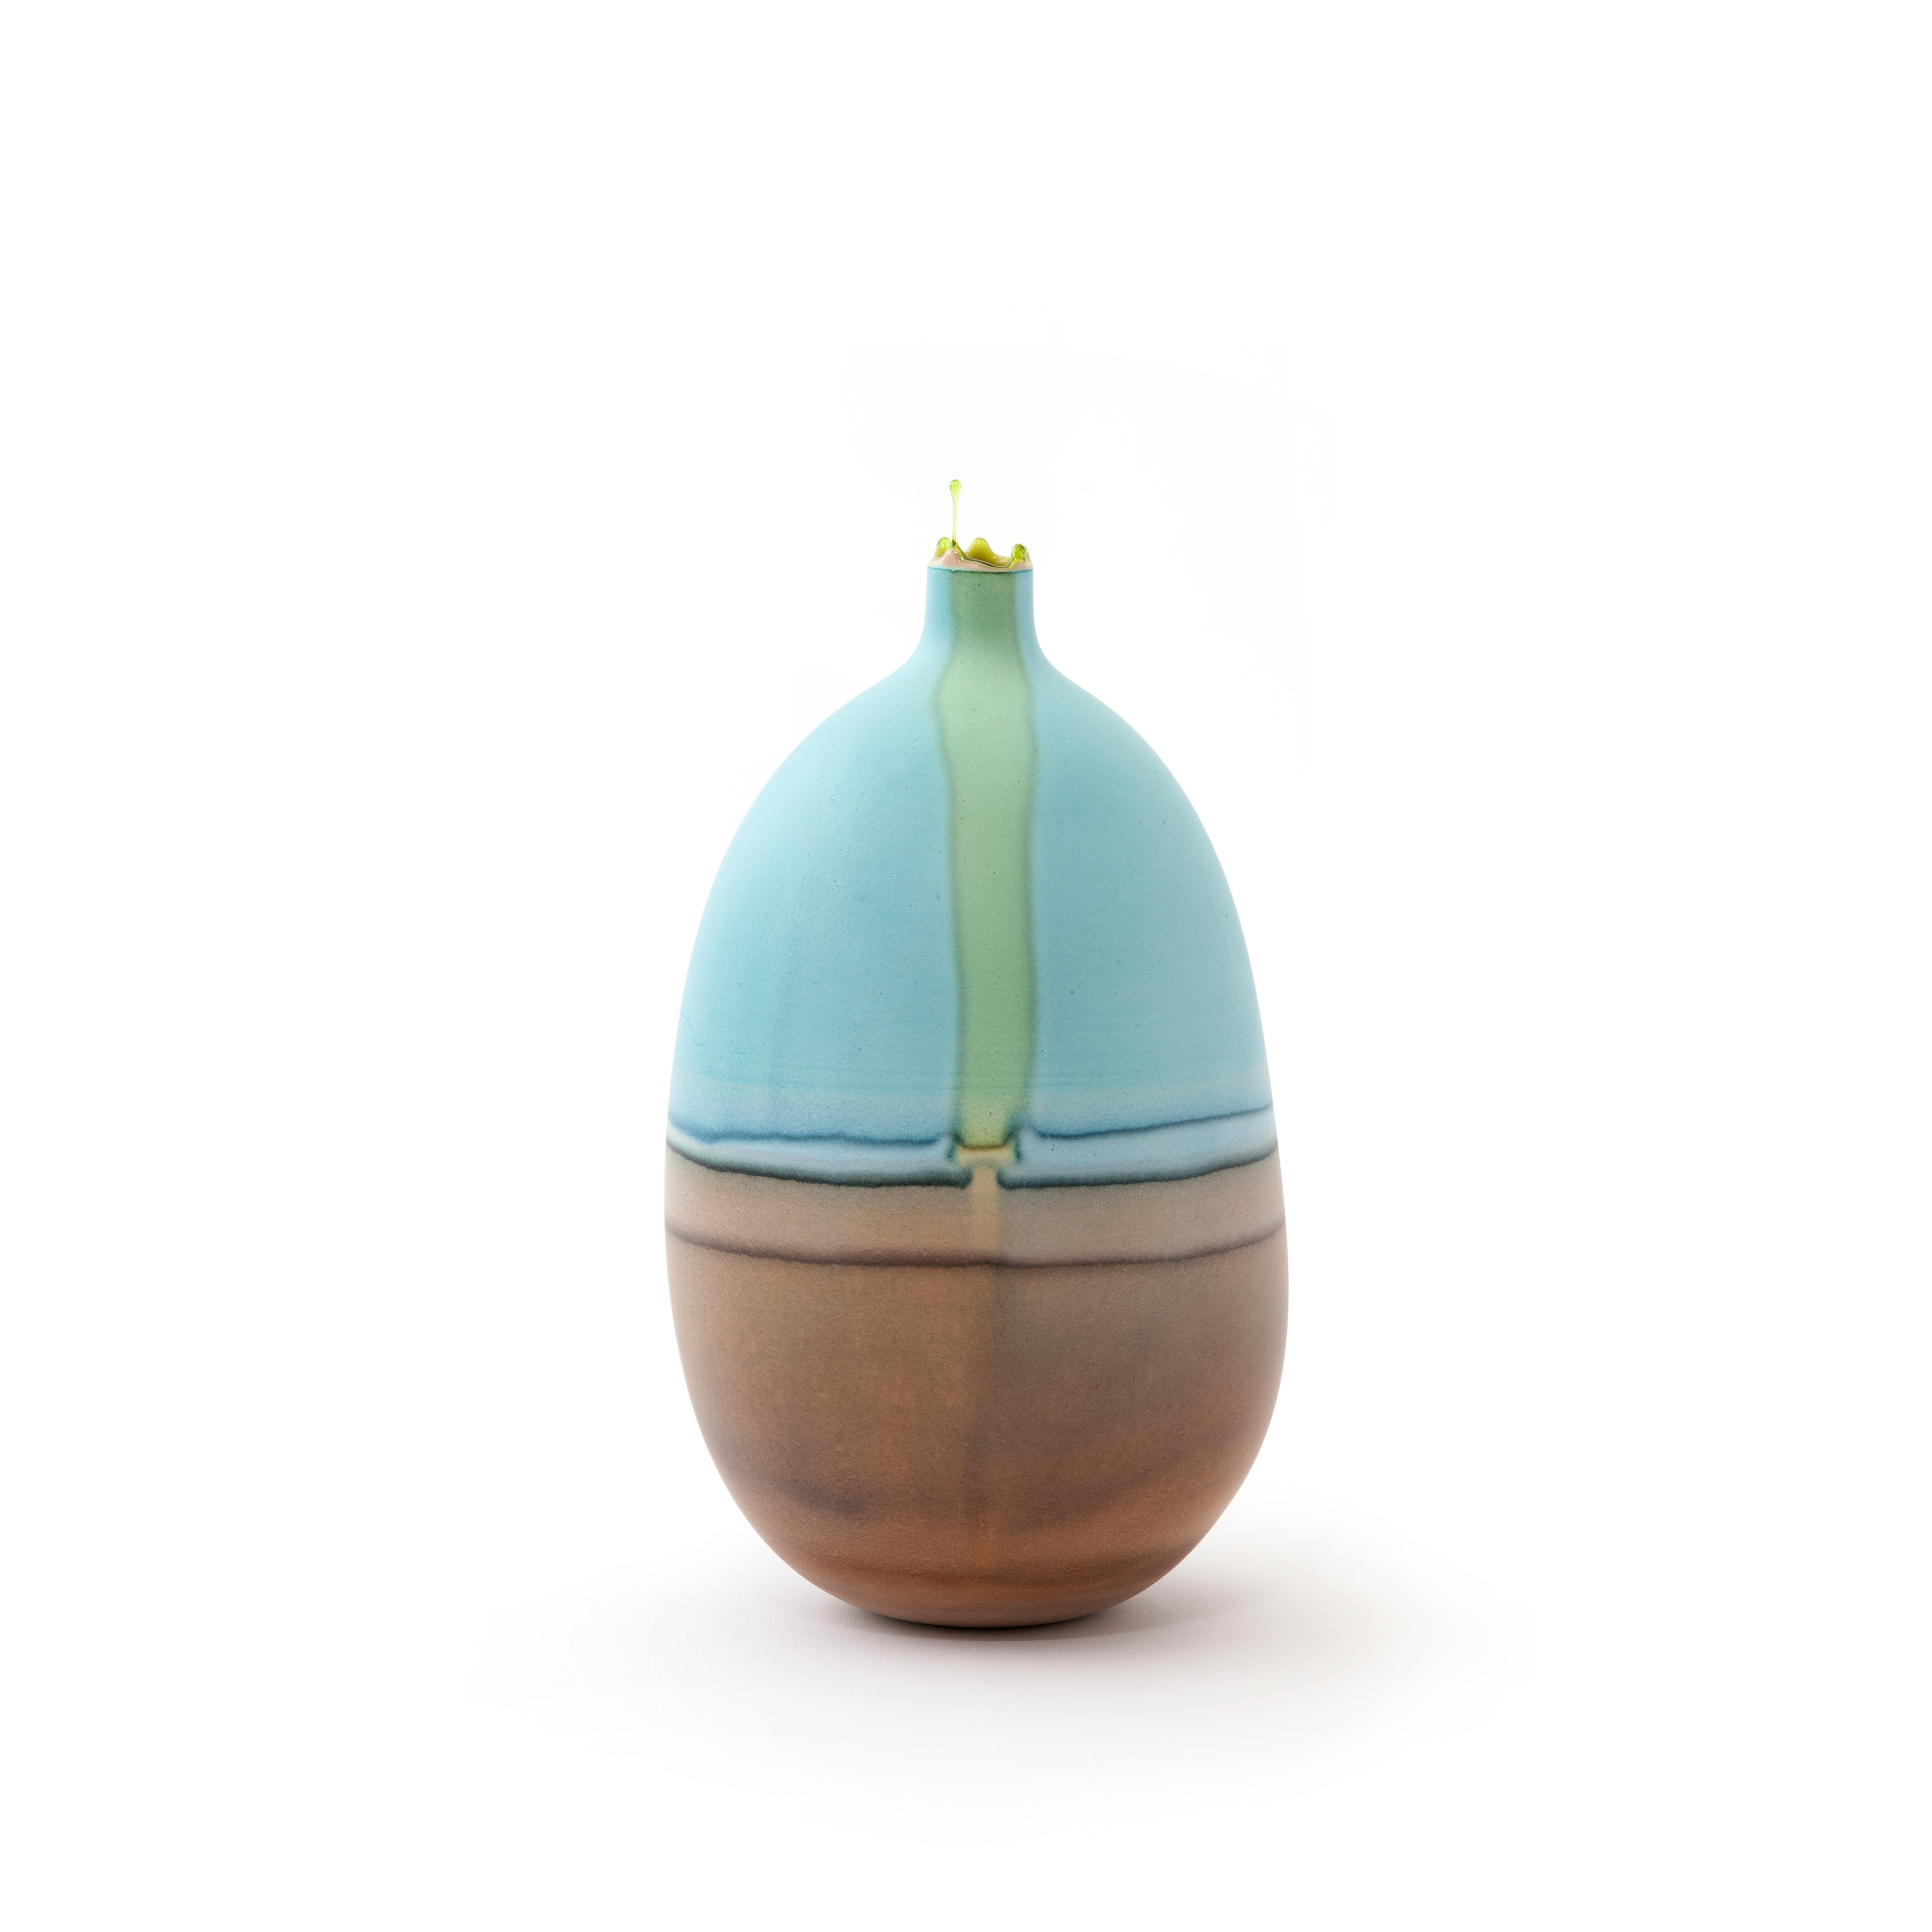 Cyan and umber mercury vase by Elyse Graham
Dimensions: W 14 x D 14 x H 25.5cm
Materials: Plaster, Resin
MOLDED, DYED, AND FINISHED BY HAND IN LA. CUSTOMIZATION
AVAILABLE.
ALL PIECES ARE MADE TO ORDER

This collection of vessels is inspired